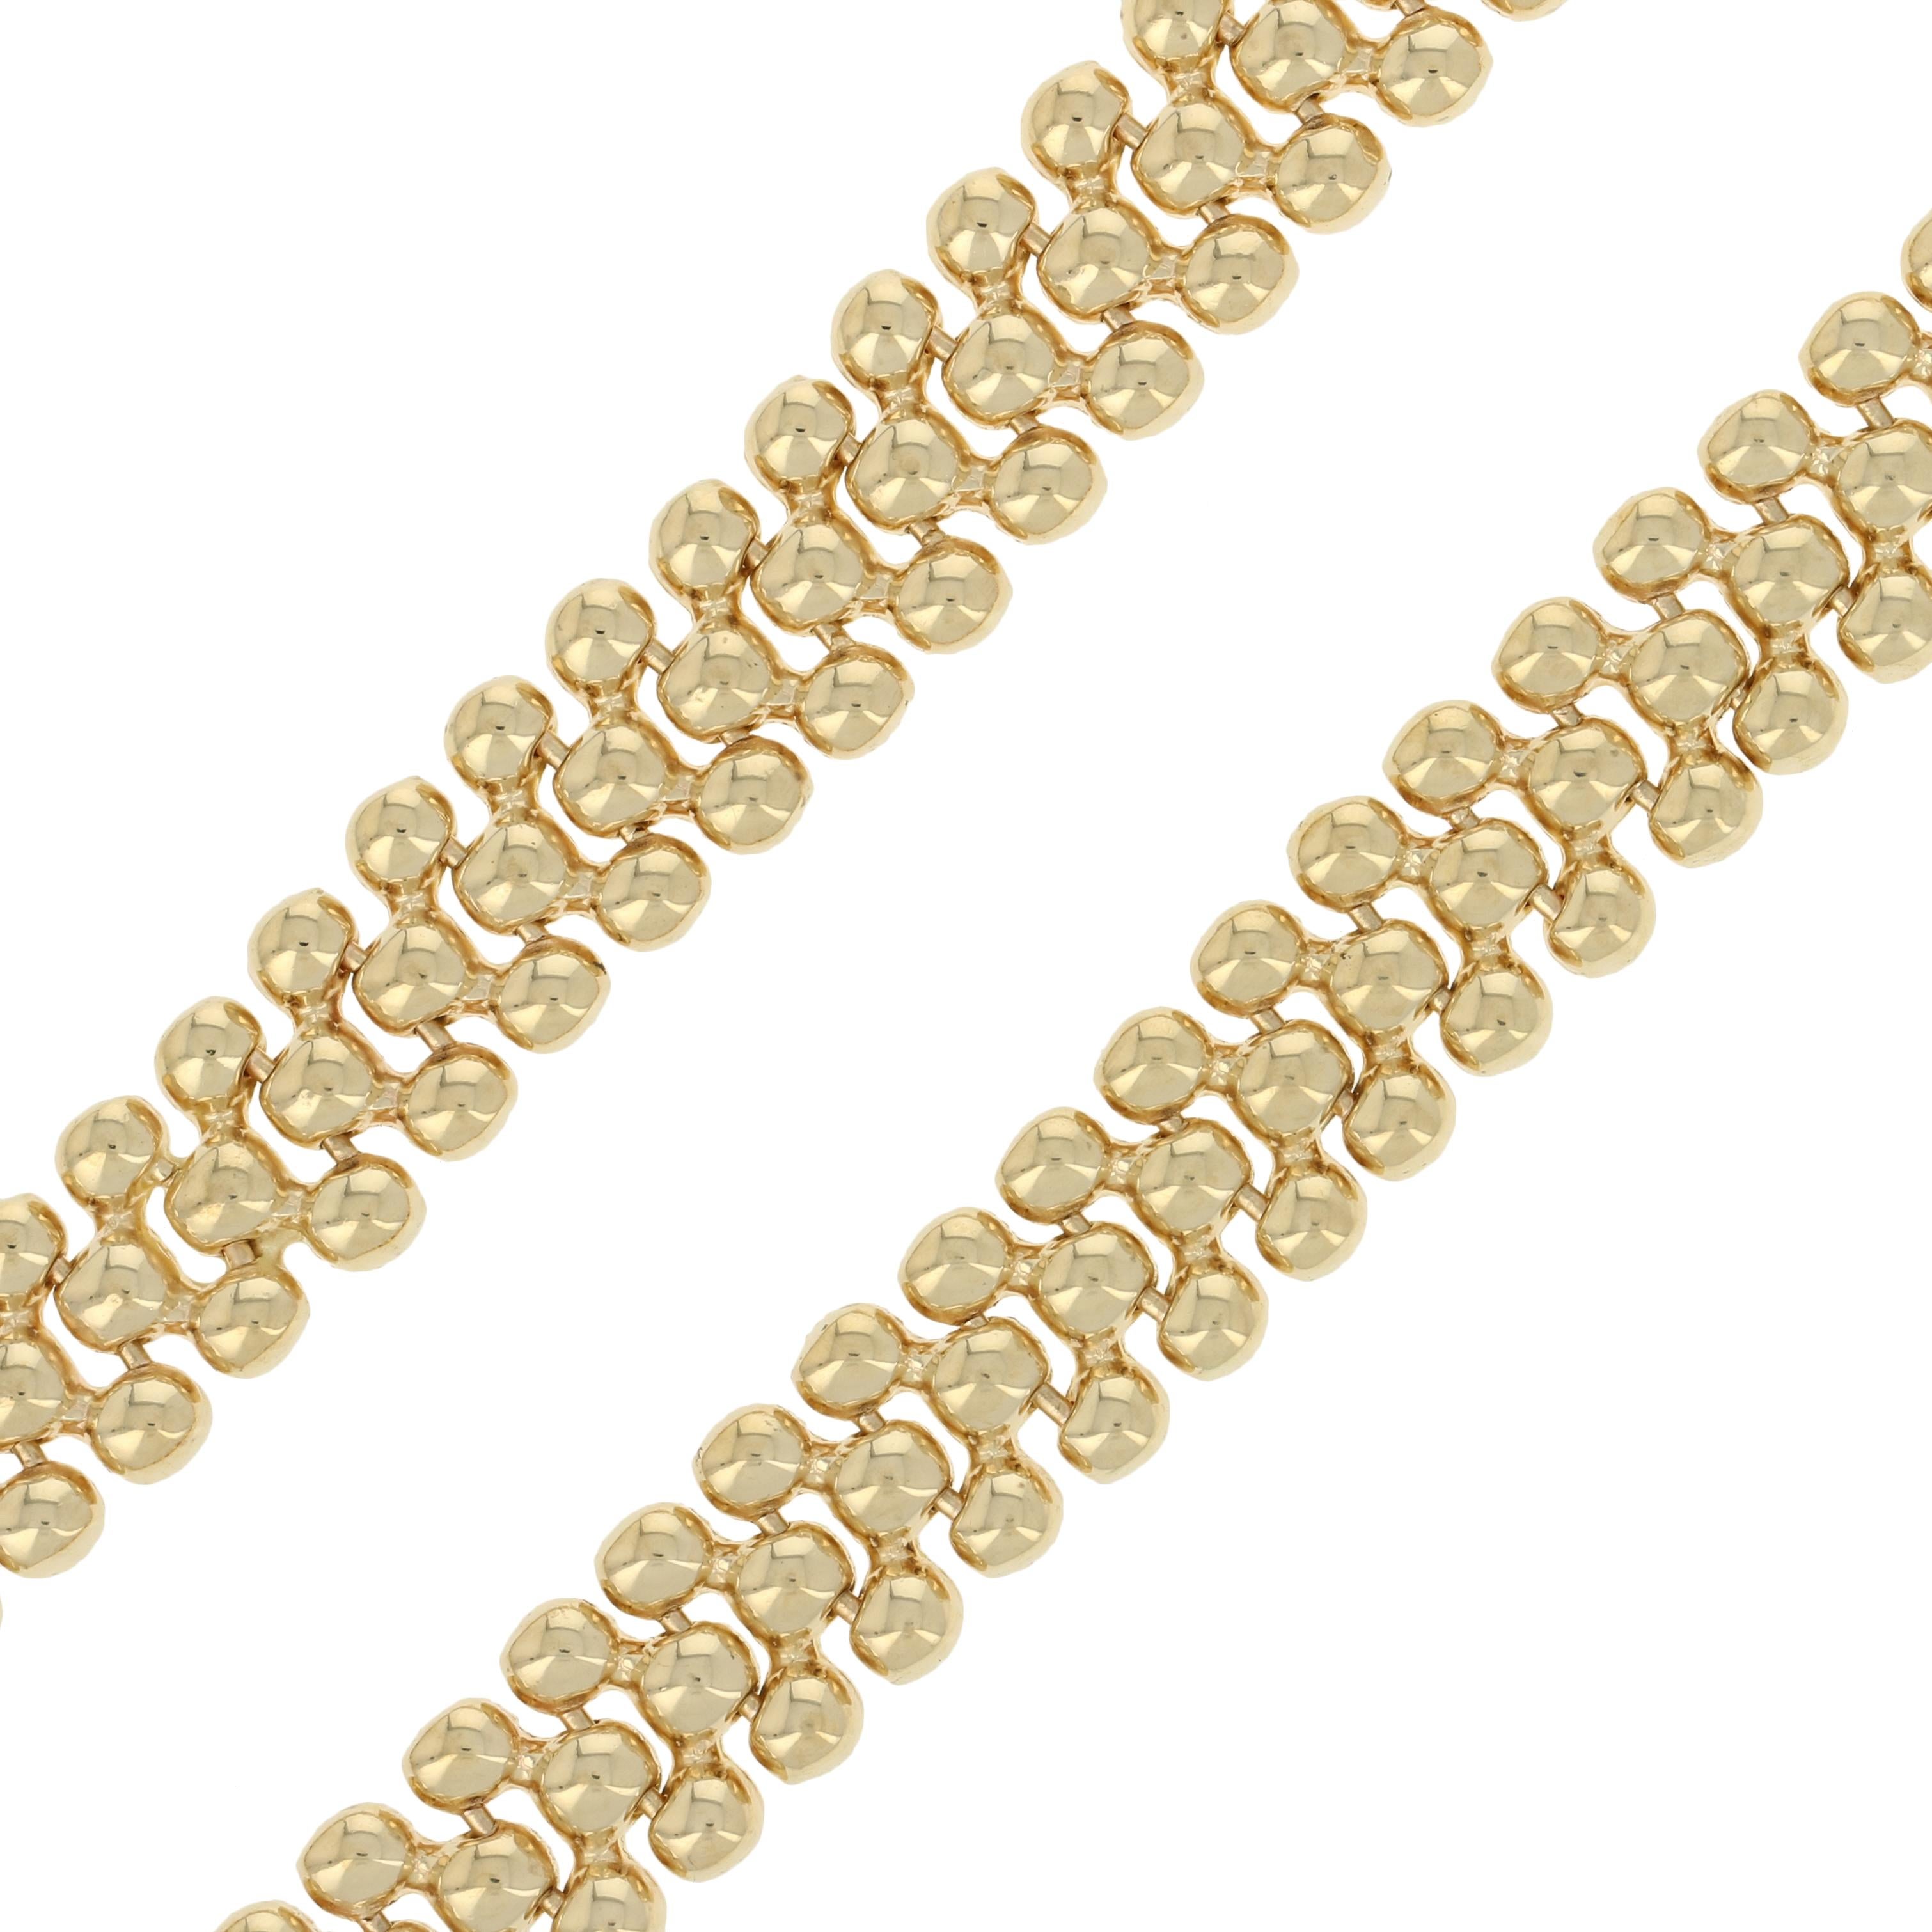 Chic sophistication defined! Exquisitely crafted in Italy, this 14k yellow gold link necklace displays a popcorn chain-inspired polished bead design that shines brilliantly from every angle for a stunning presentation.   

Country of Origin: